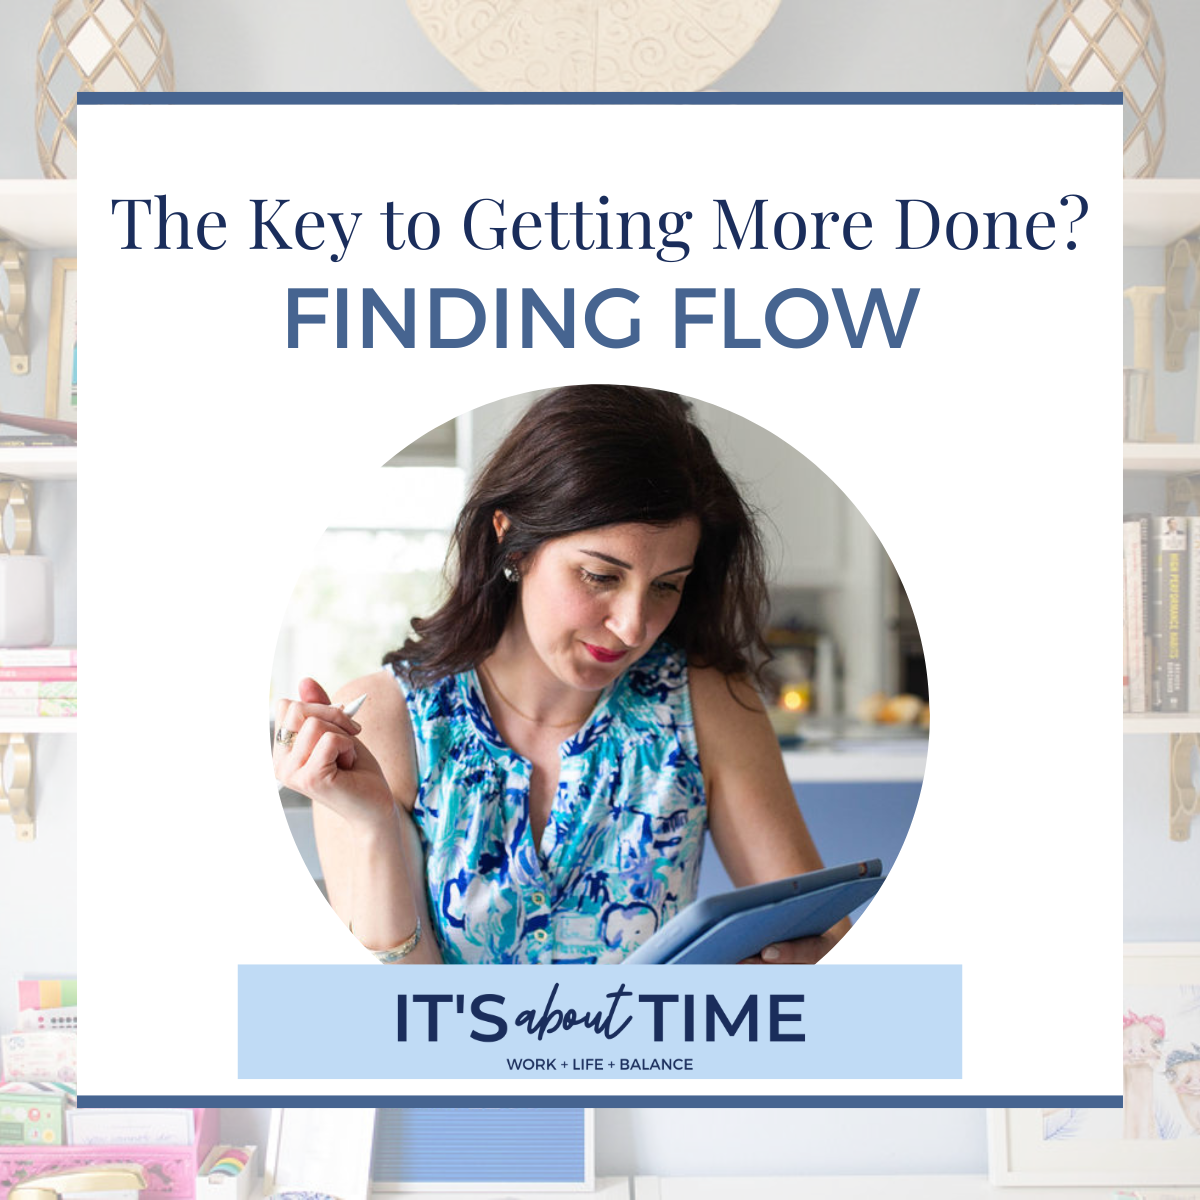 Get More Done by Finding Flow